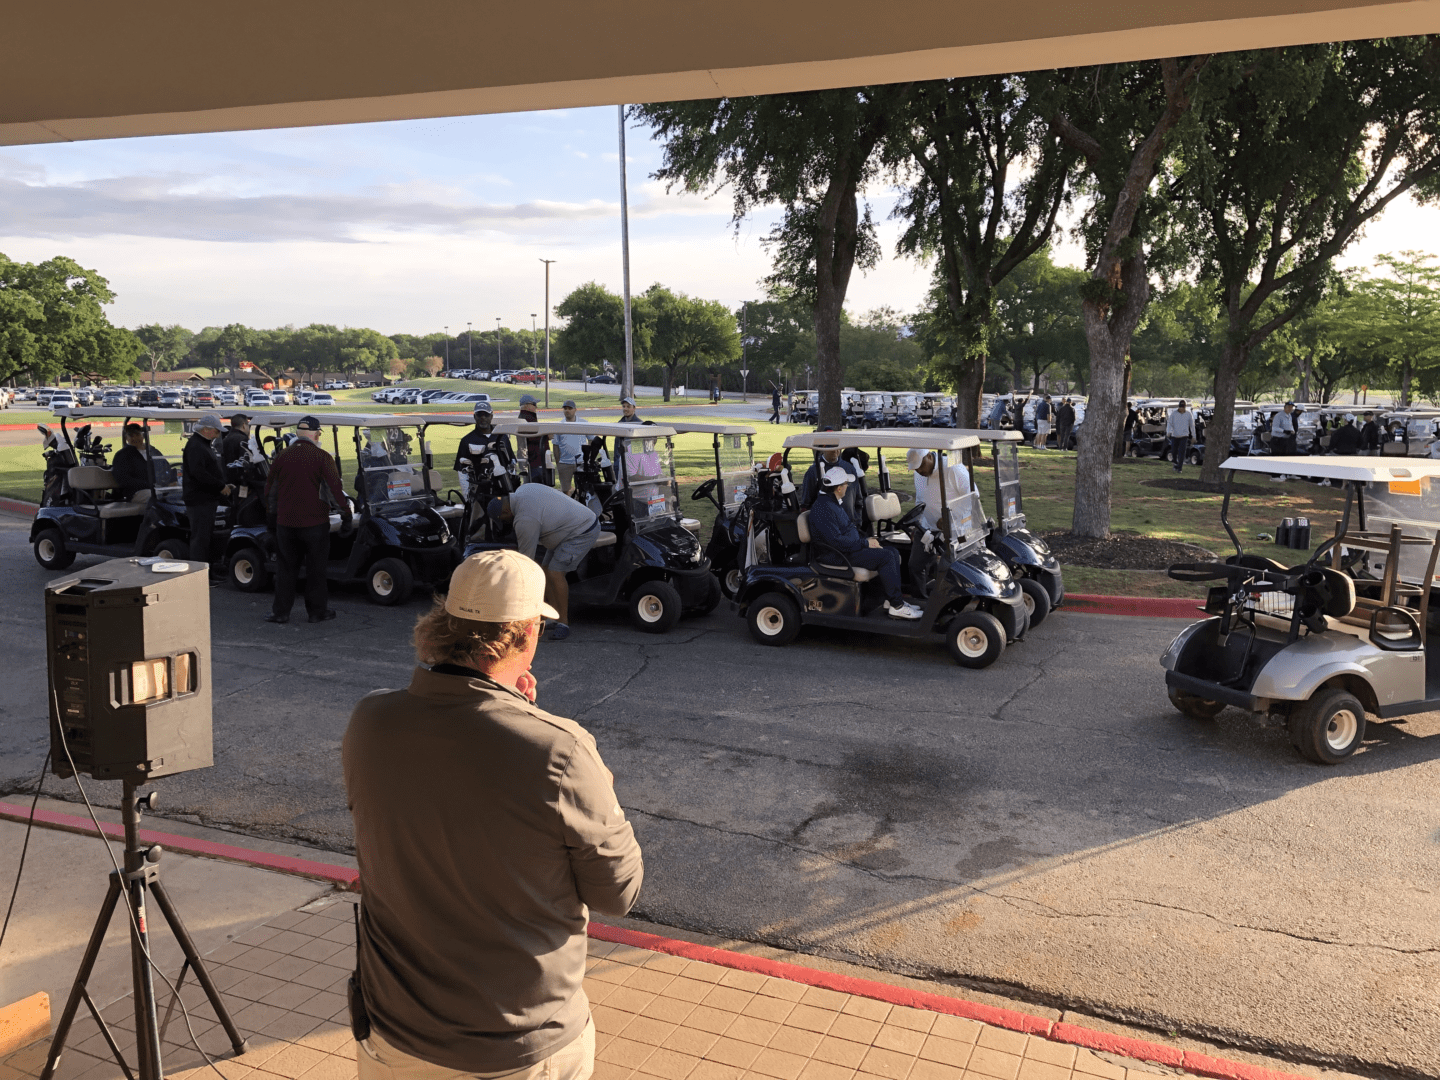 A man is standing in front of a group of golf carts.